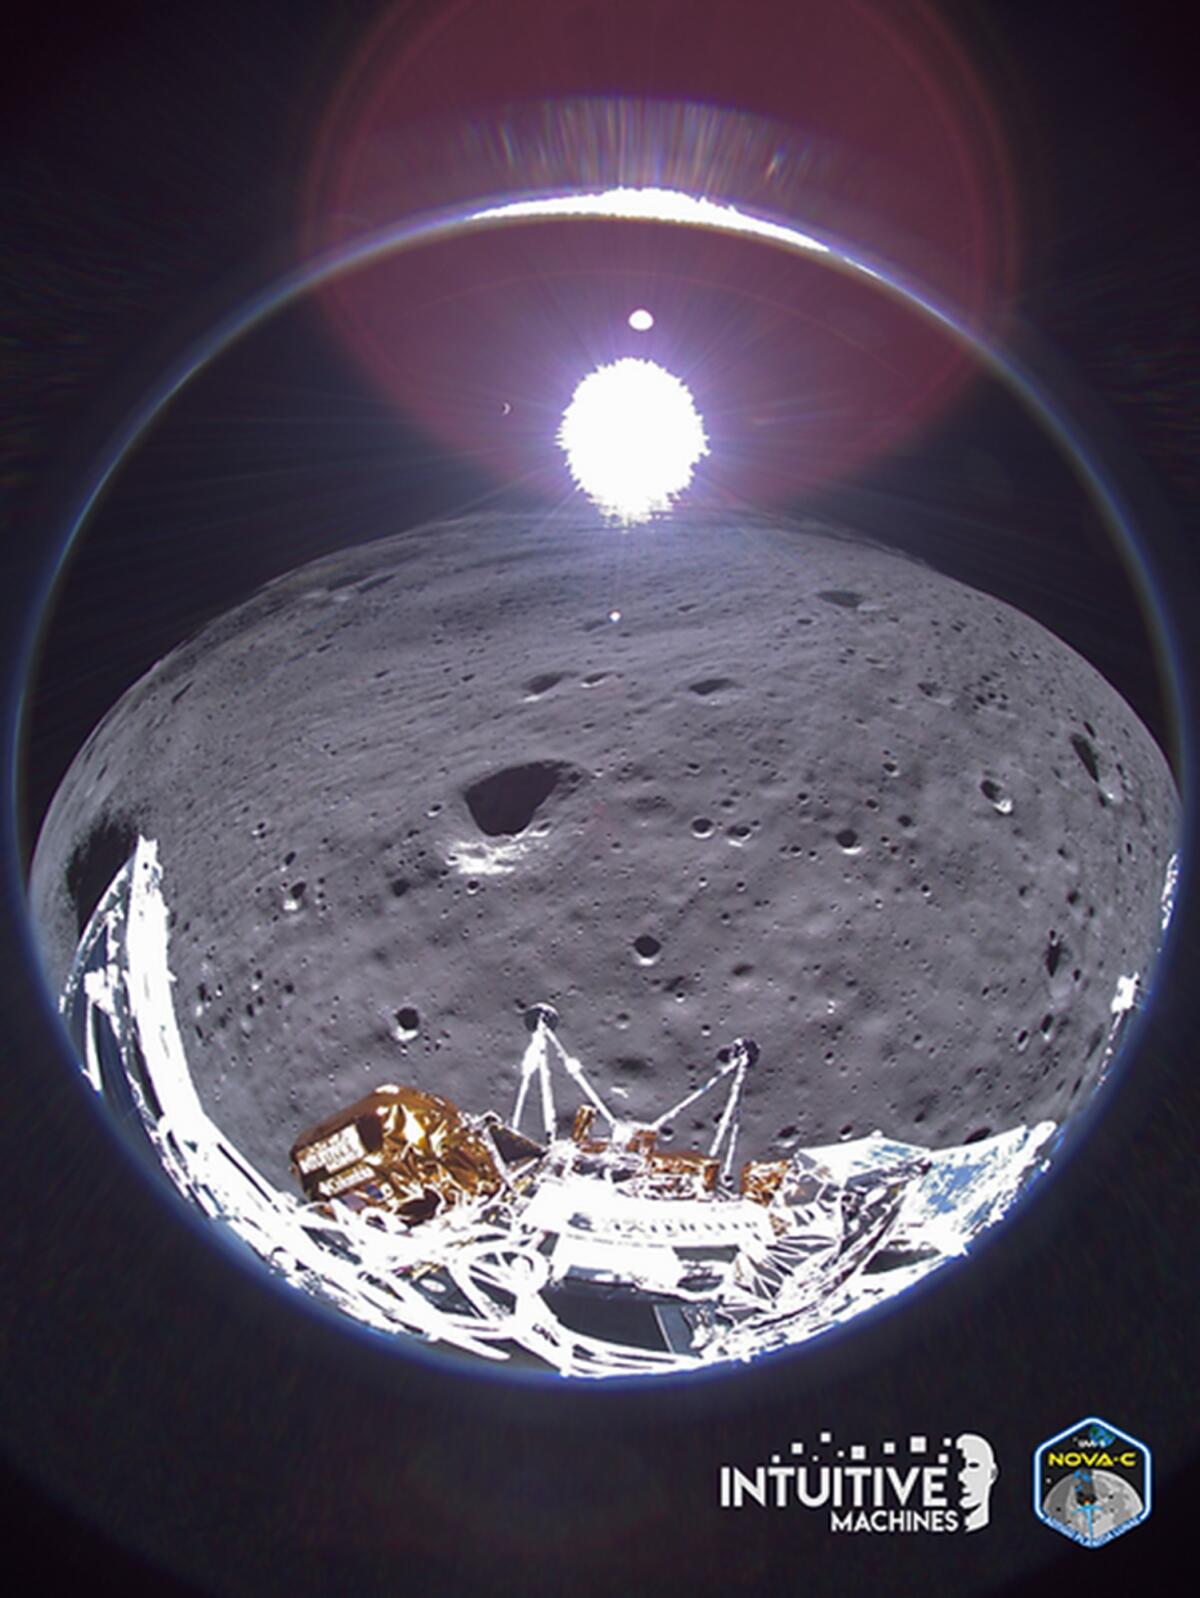 A view from the Odysseus lunar lander made with a fisheye lens.